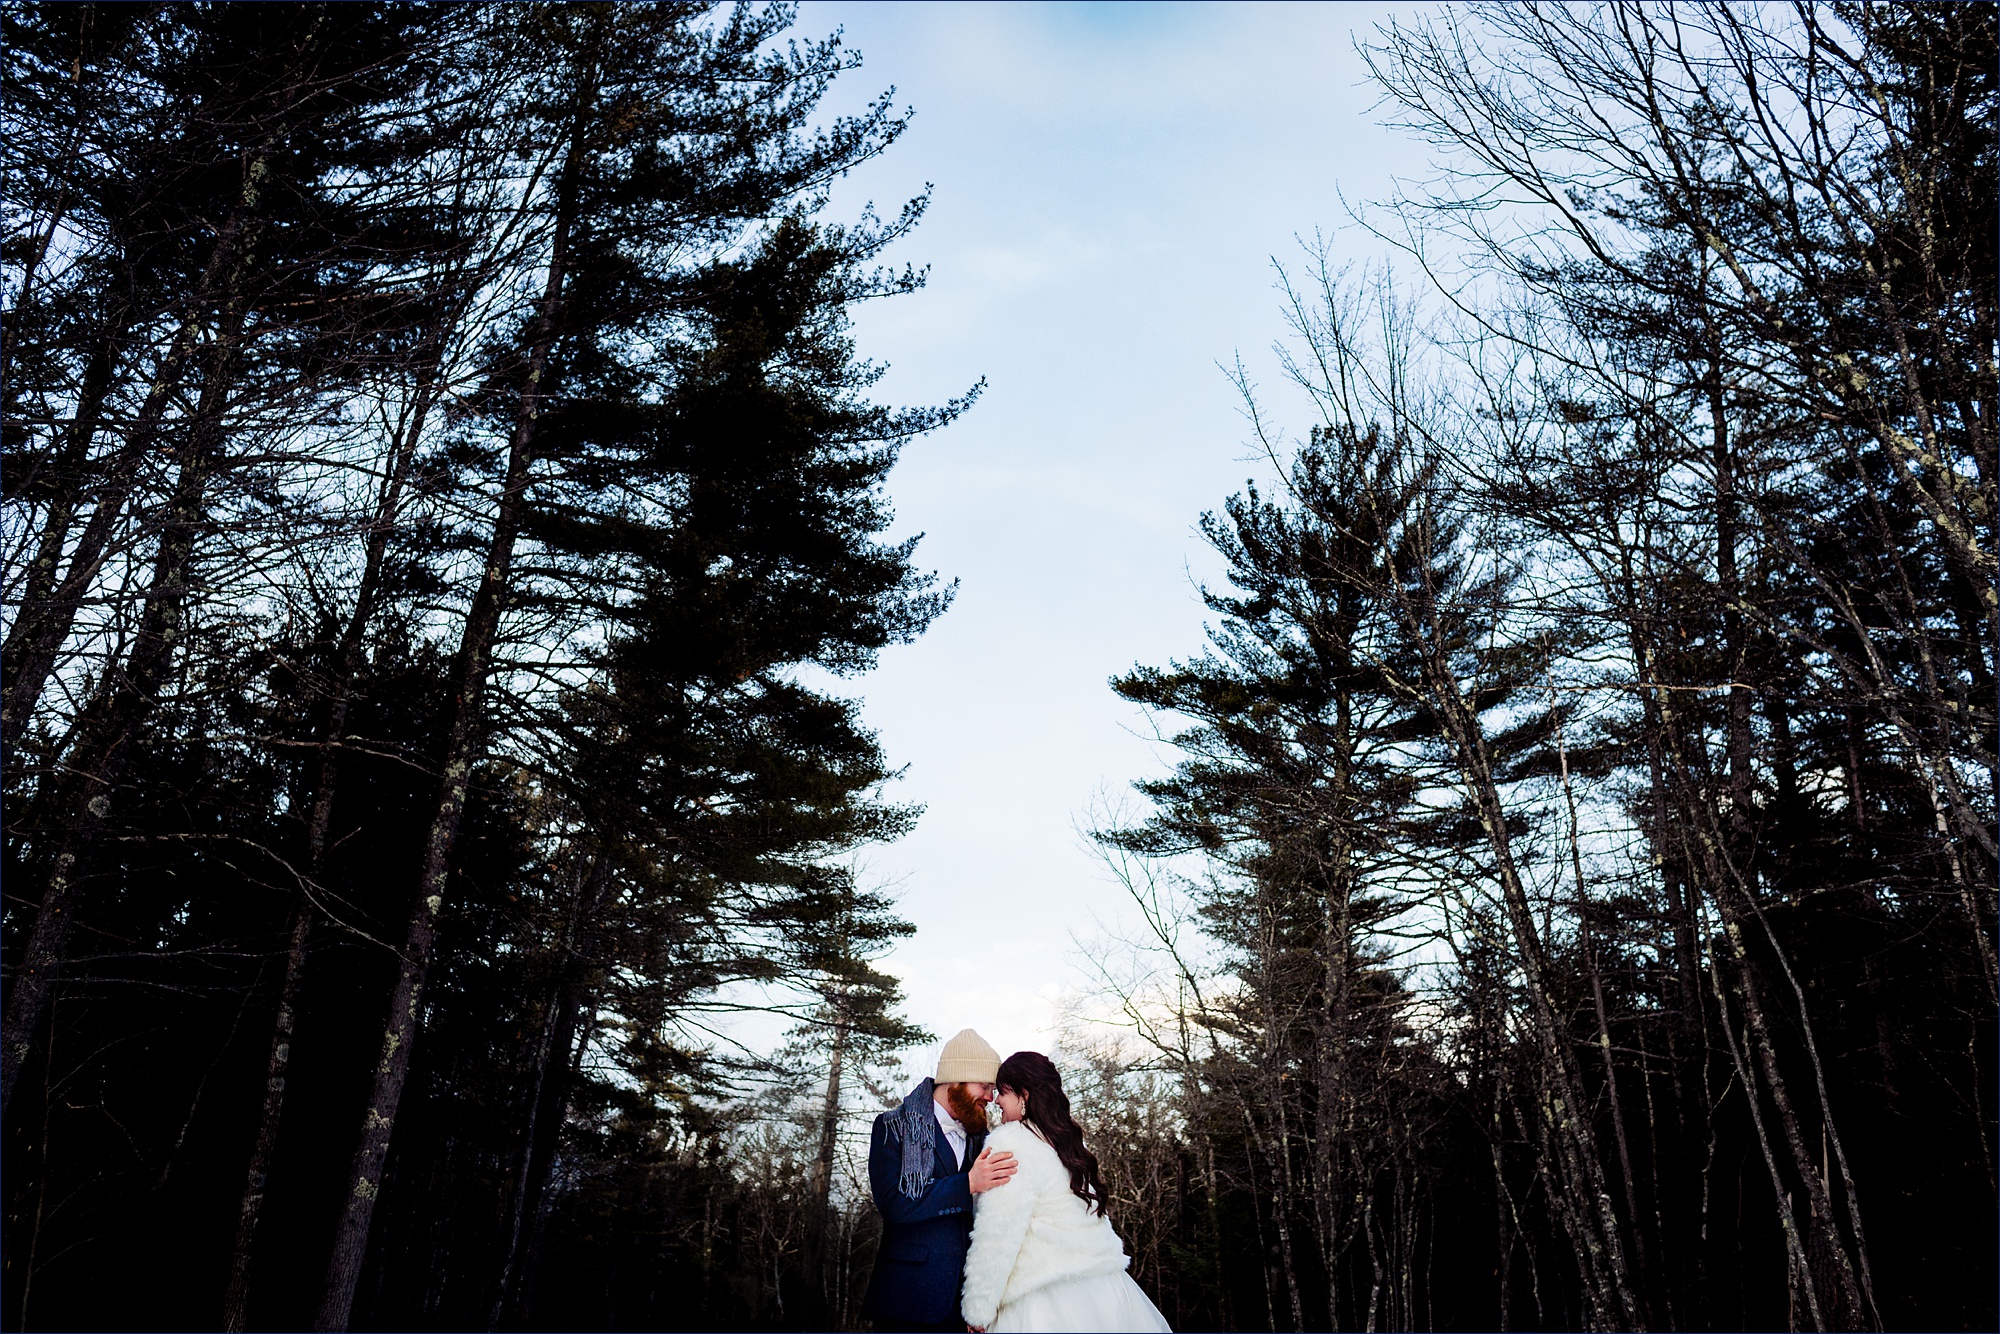 Echo Lake State Park Elopement NH the couple cuddles close in the winter in the woods